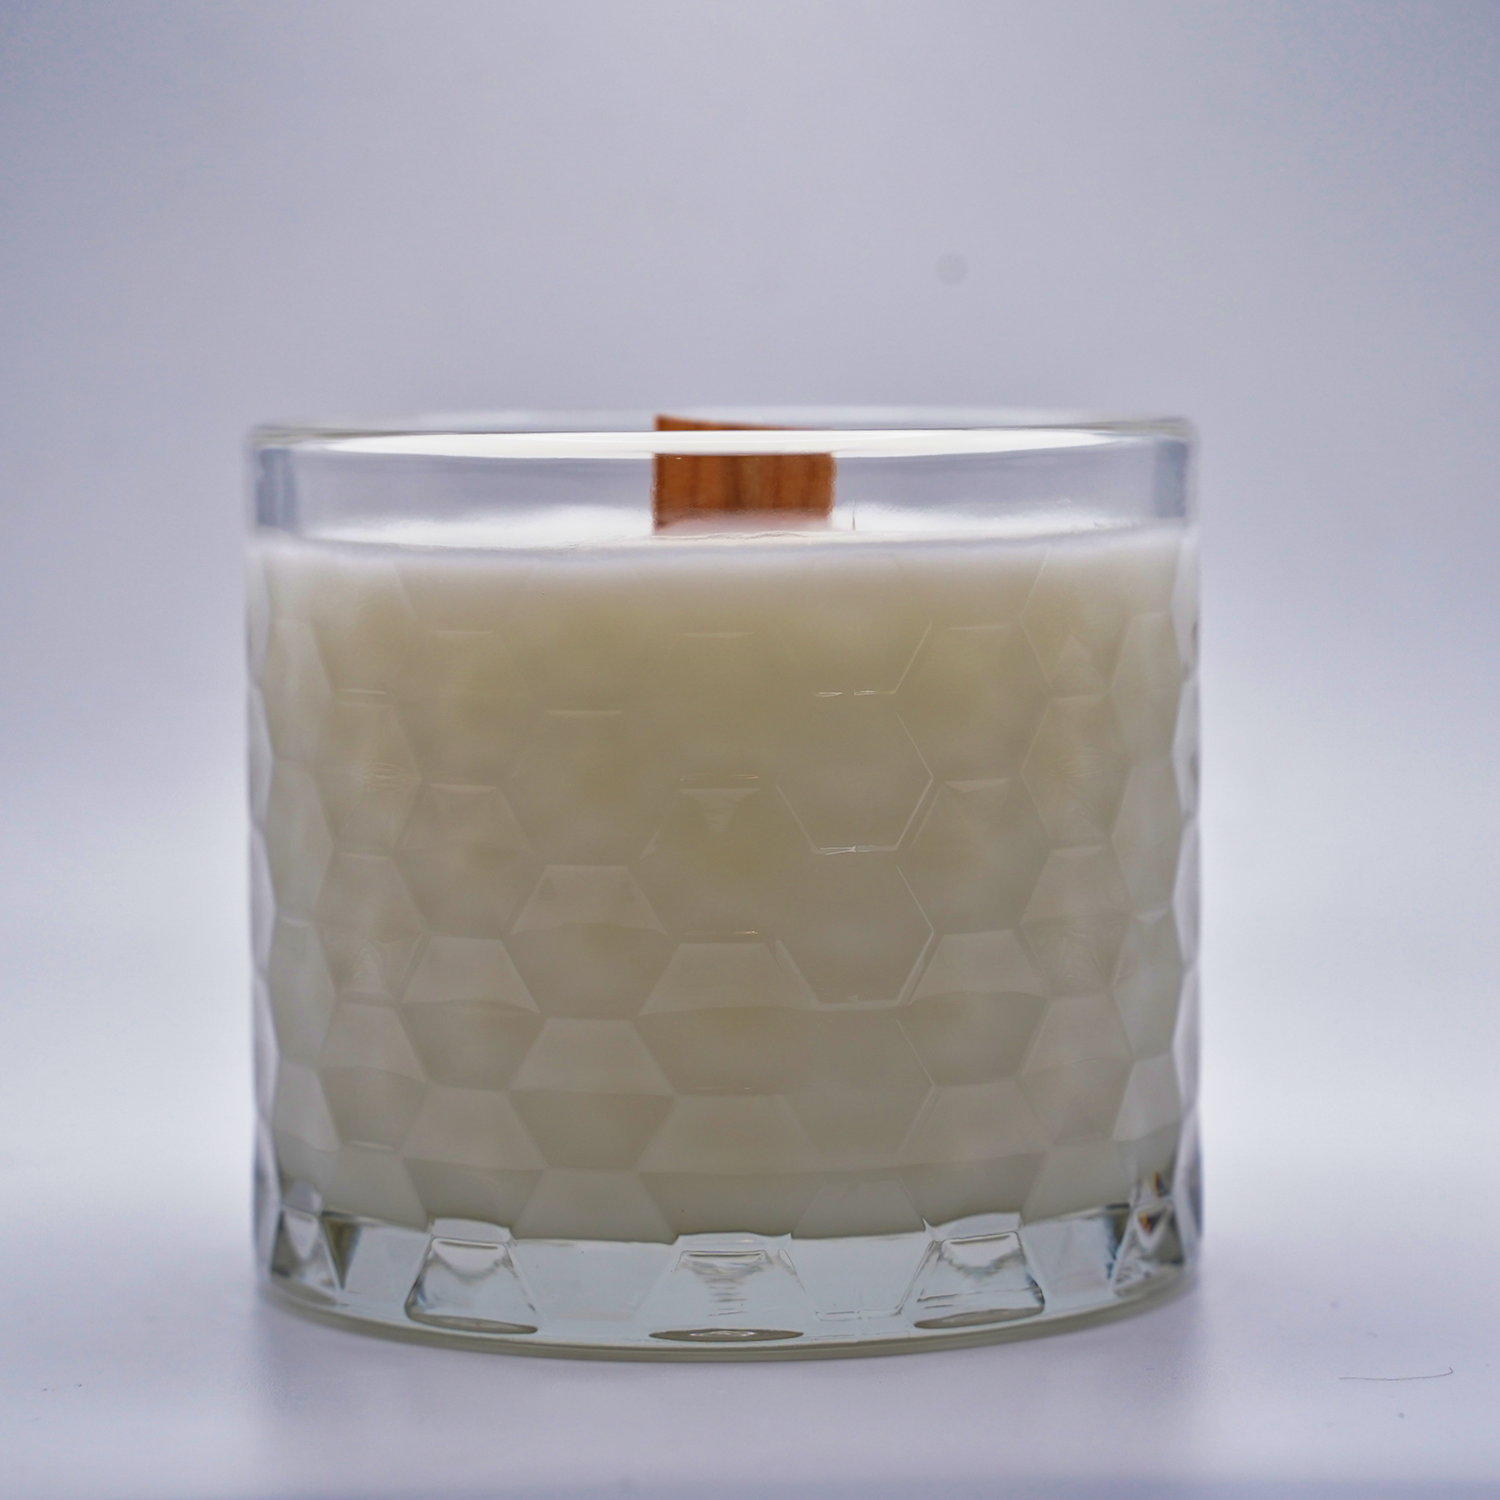 Beautiful Beaches candle - Smell This Candle - Candles